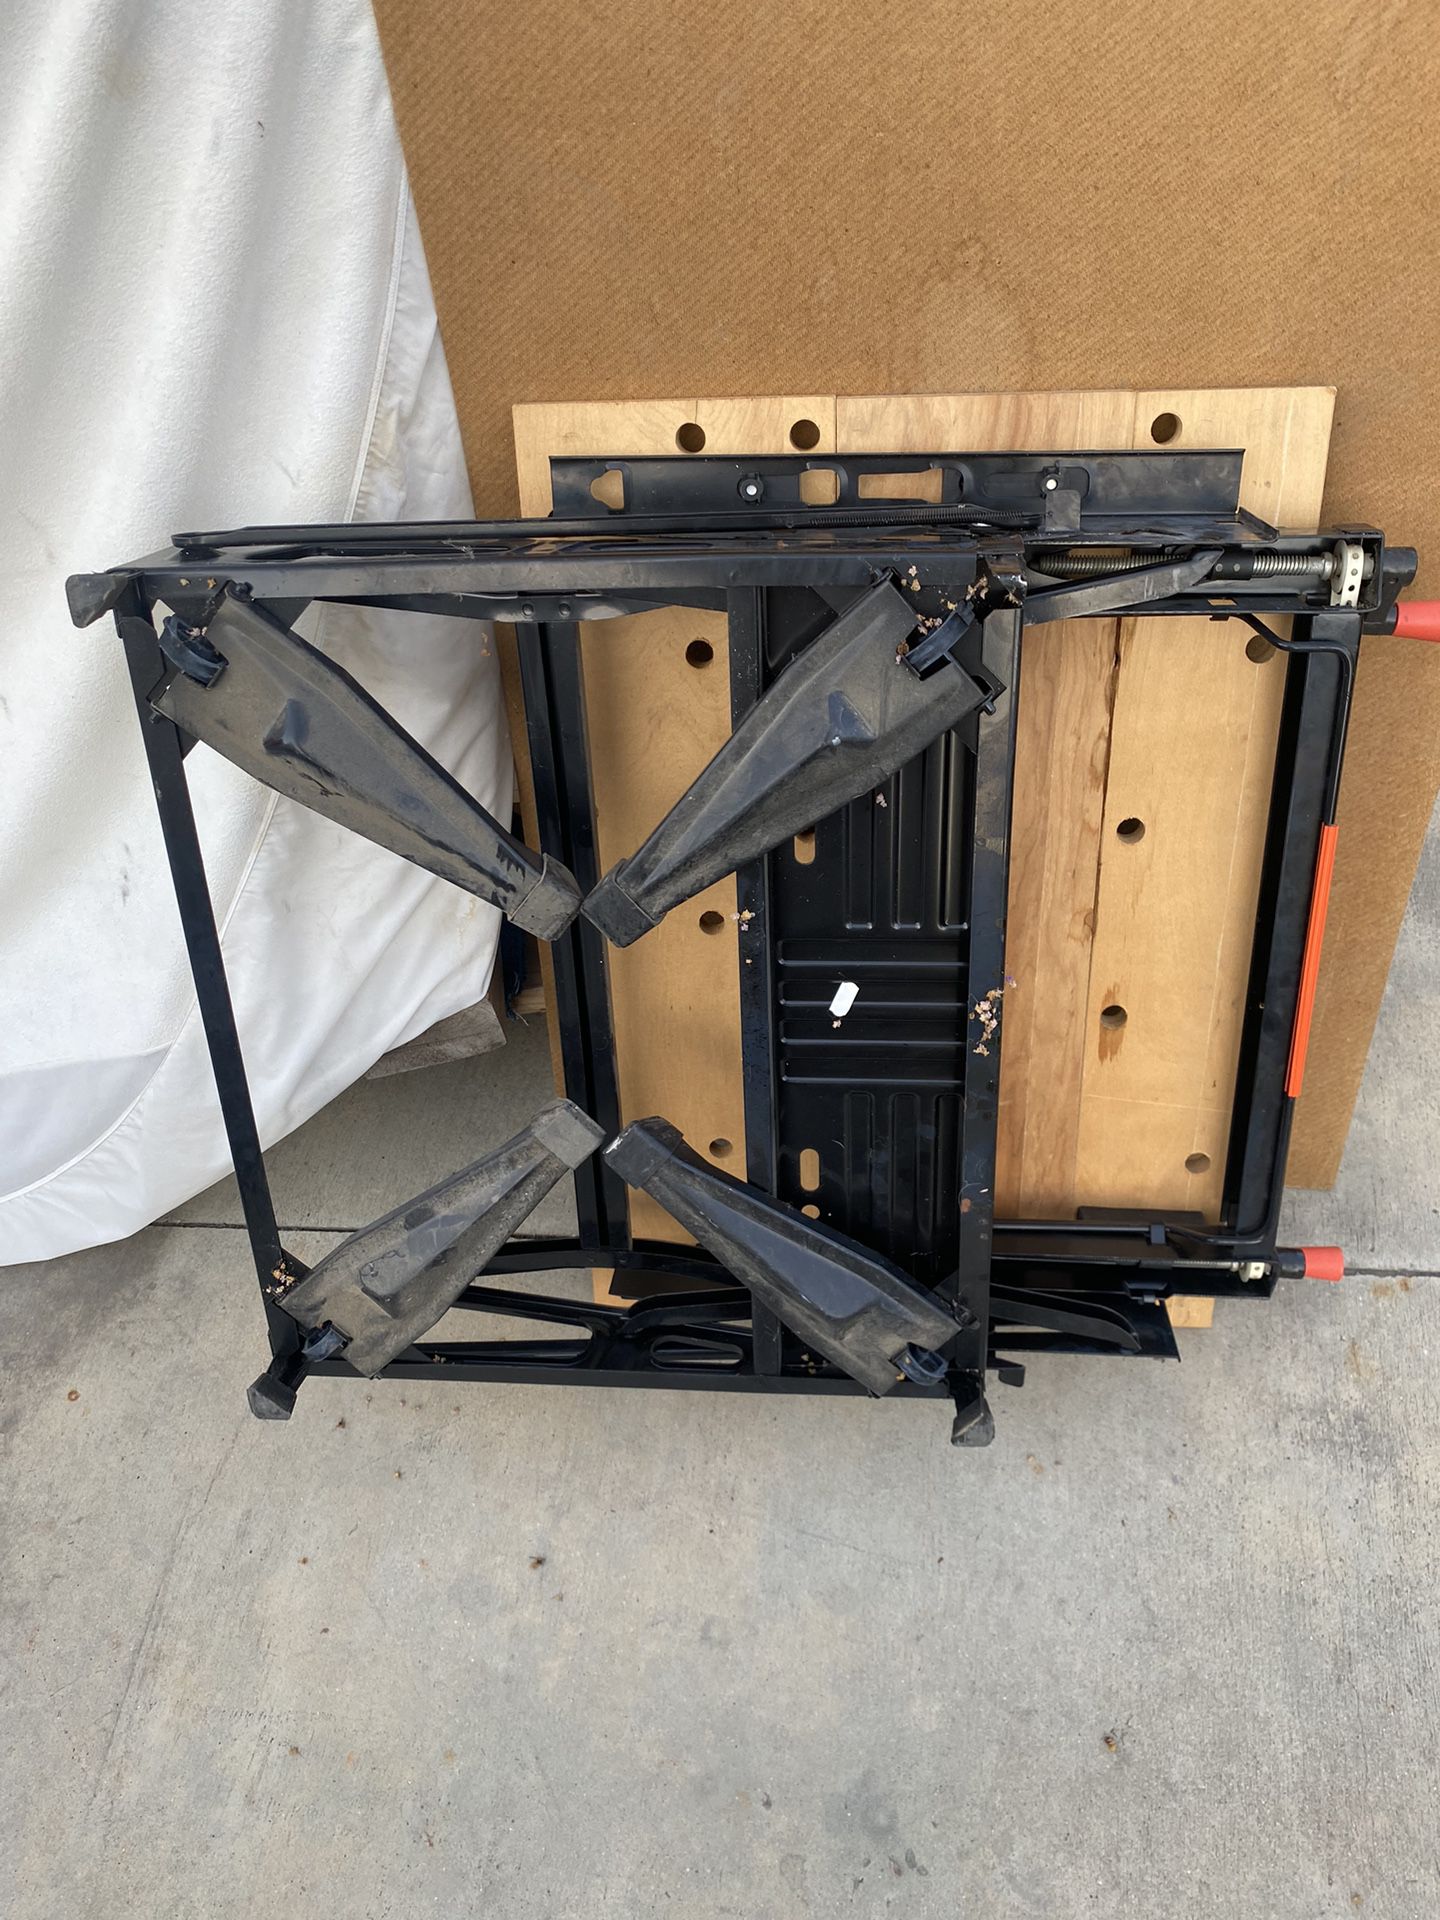 BLACK & DECKER WORKMATE 550 TABLE $40 for Sale in Santa Ana, CA - OfferUp